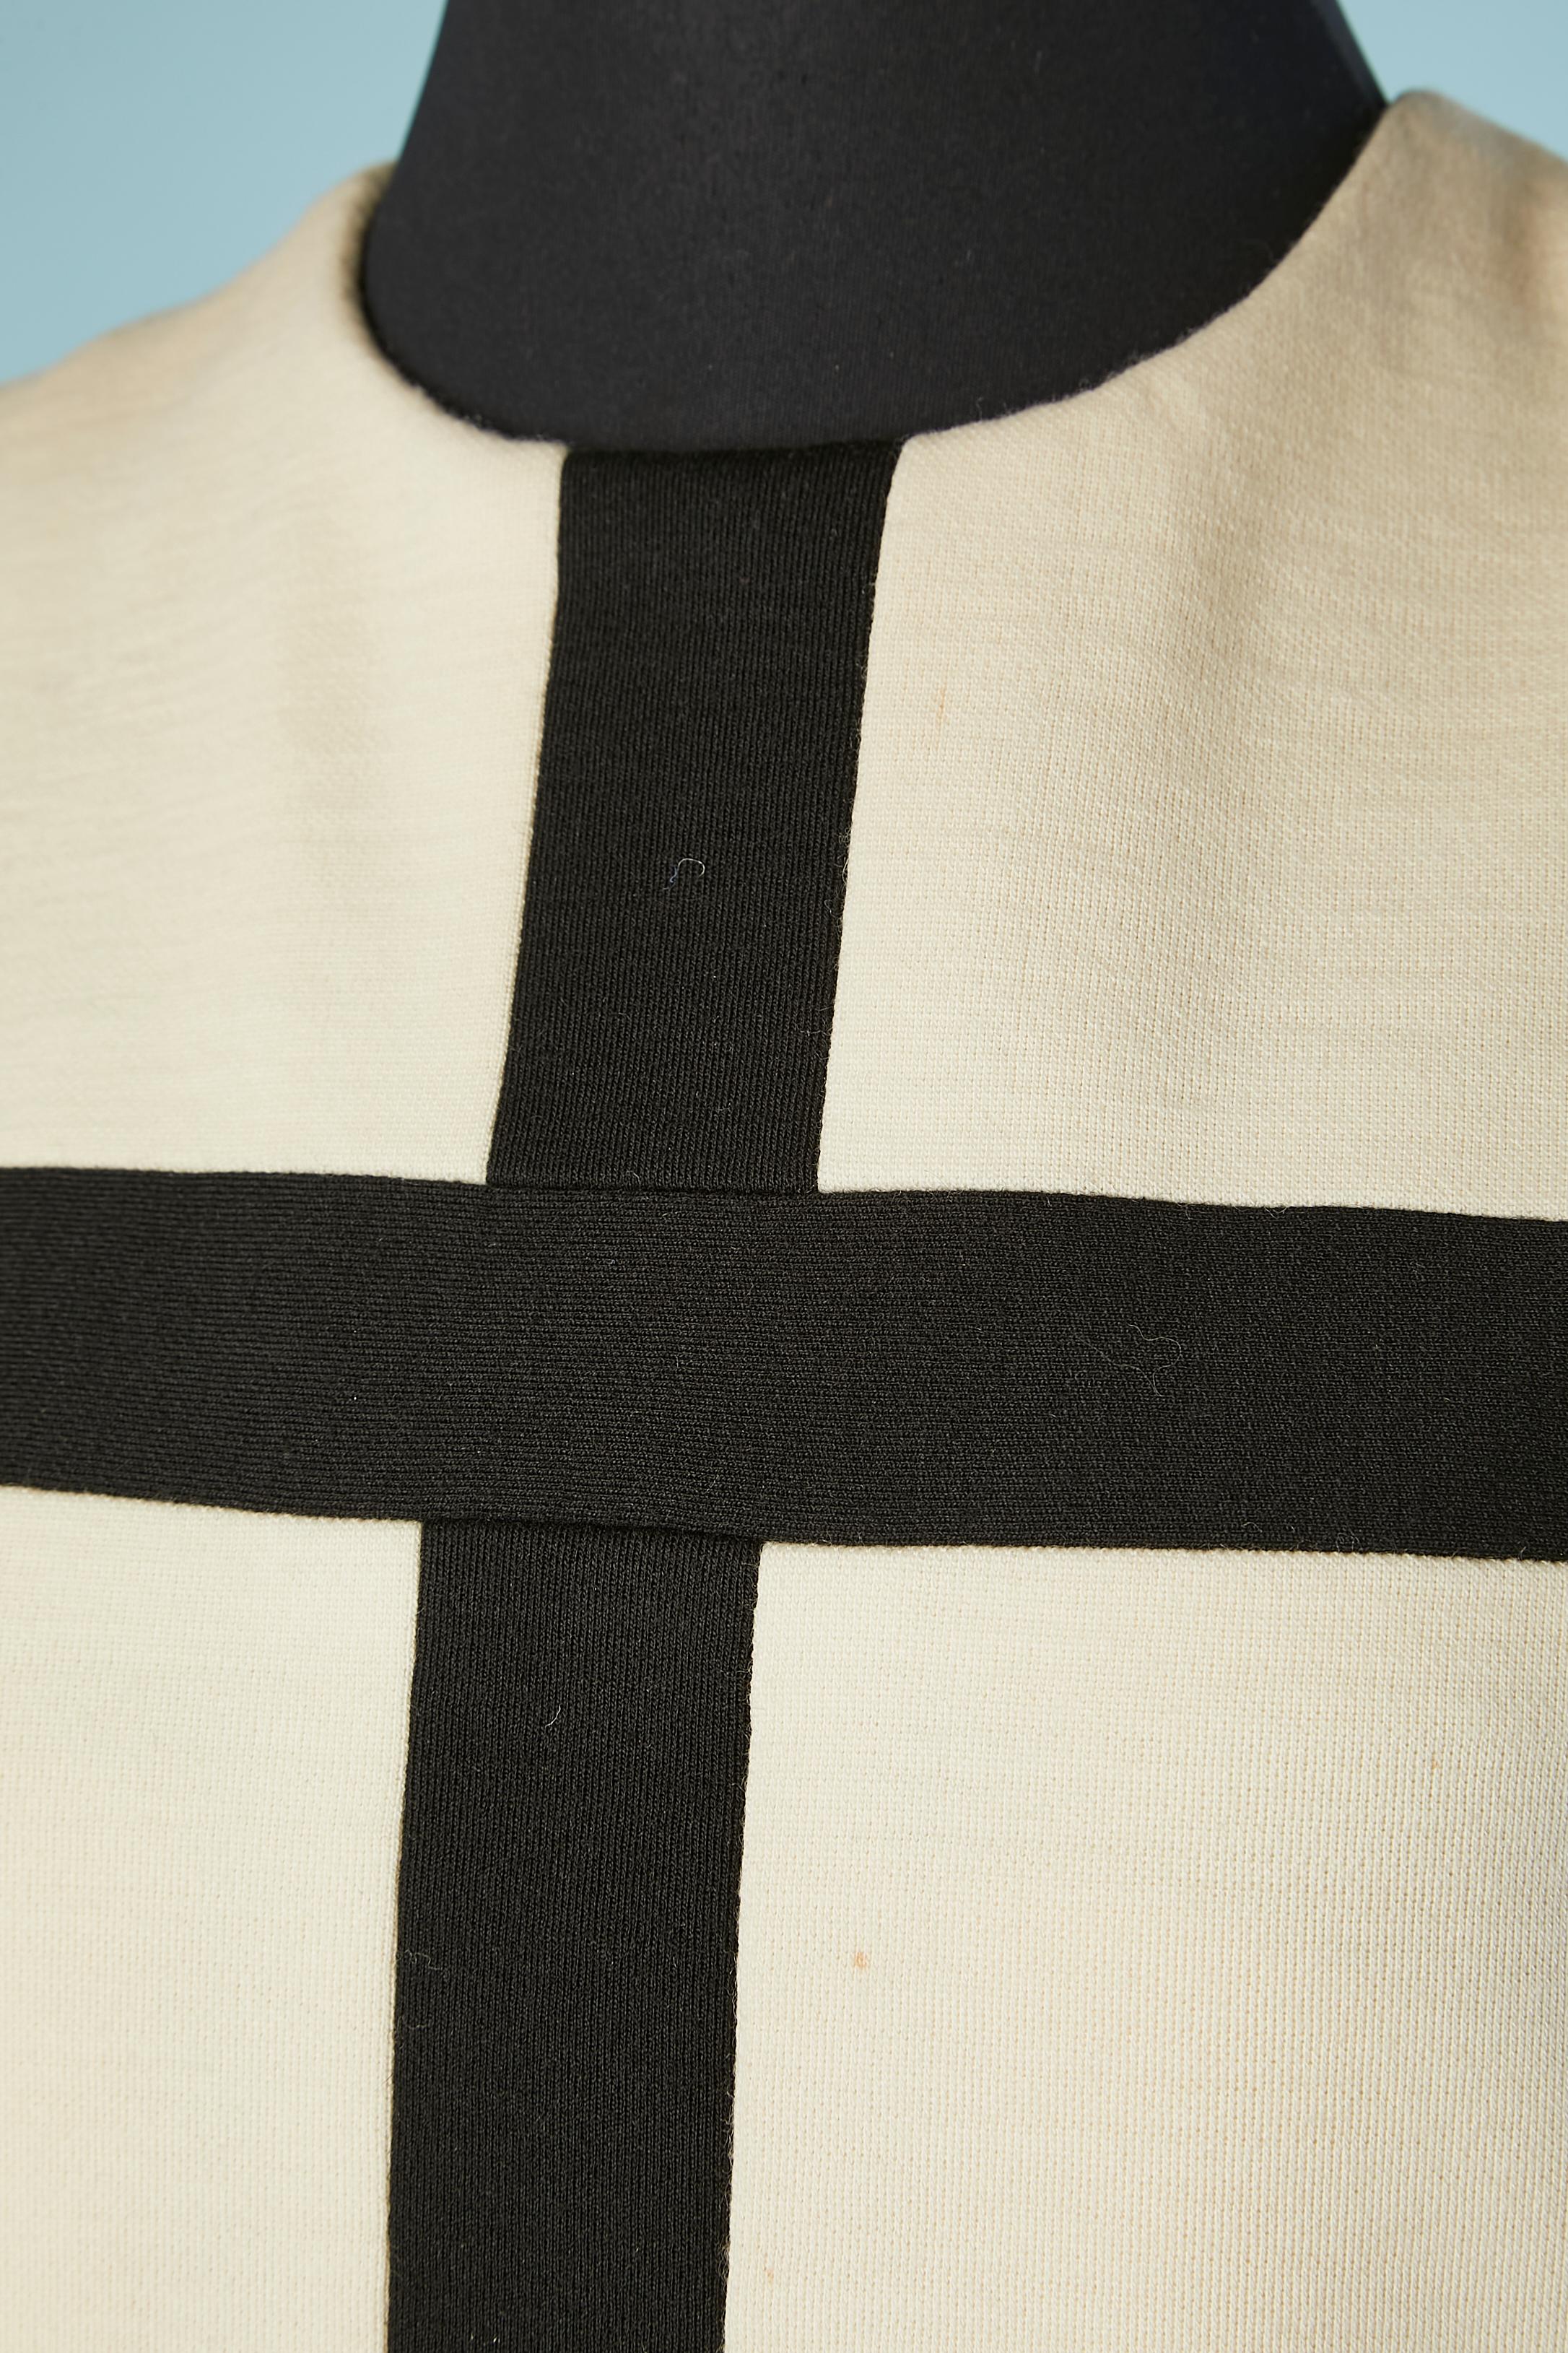 Iconic Mondrian dress in black and white wool jersey with silk satin lining. Zip in the middle back with one hook&eye on the top part. 
NO BRAND LABEL.
SIZE 40 ( 10 US) 